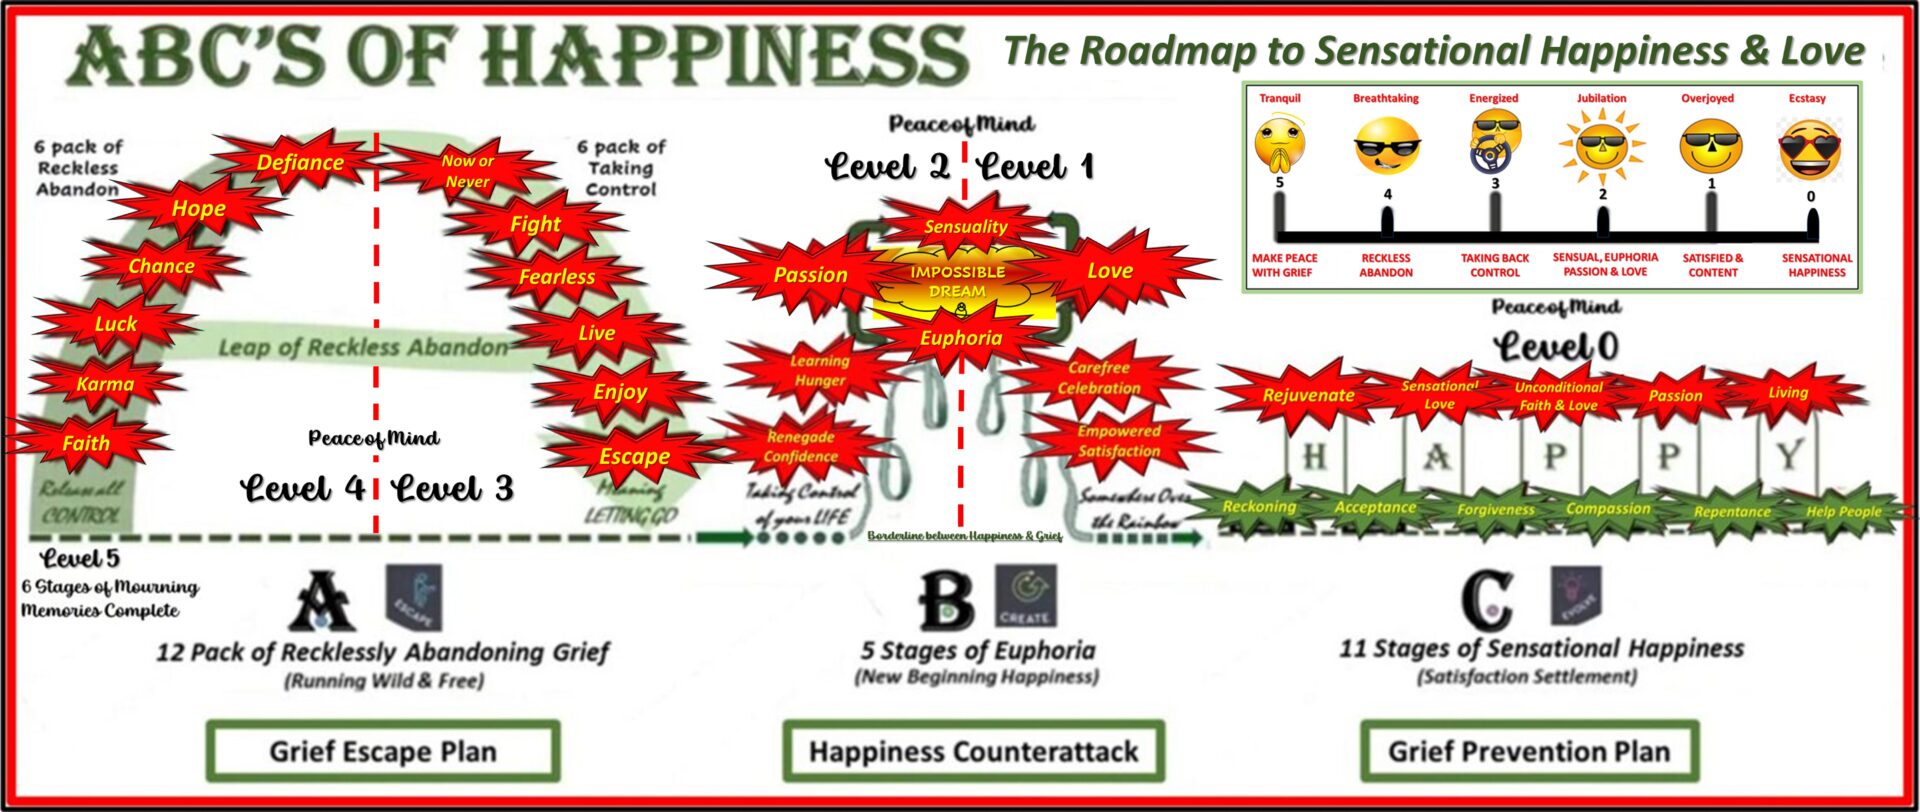 ABC's of Happiness Roadmap to Sensational Happiness